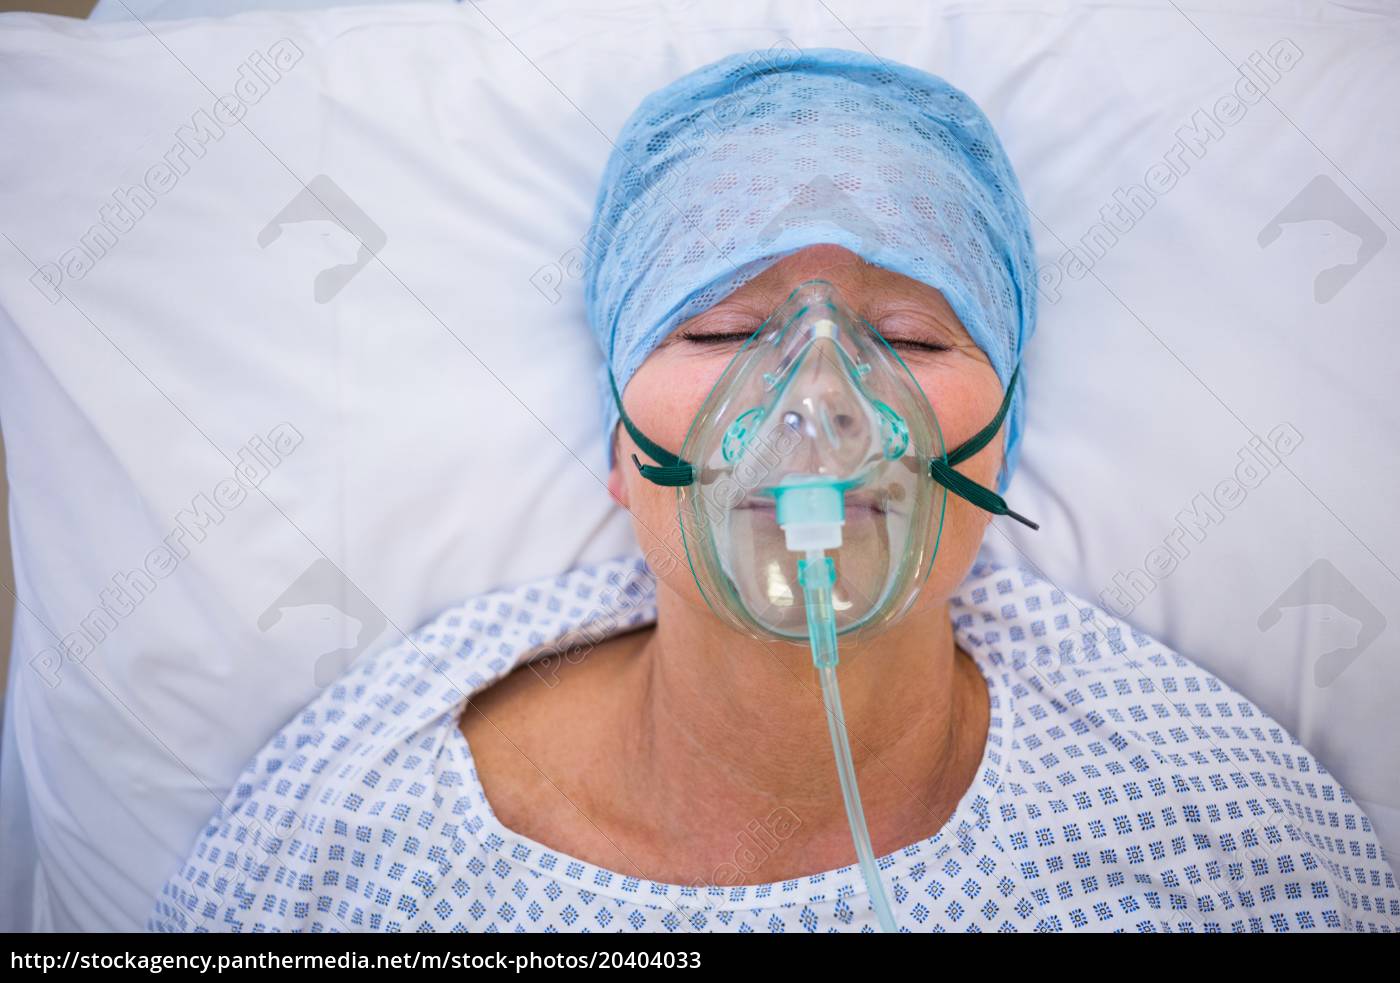 Patient wearing oxygen mask lying on hospital bed - Stock Photo - #20404033  - PantherMedia Stock Agency